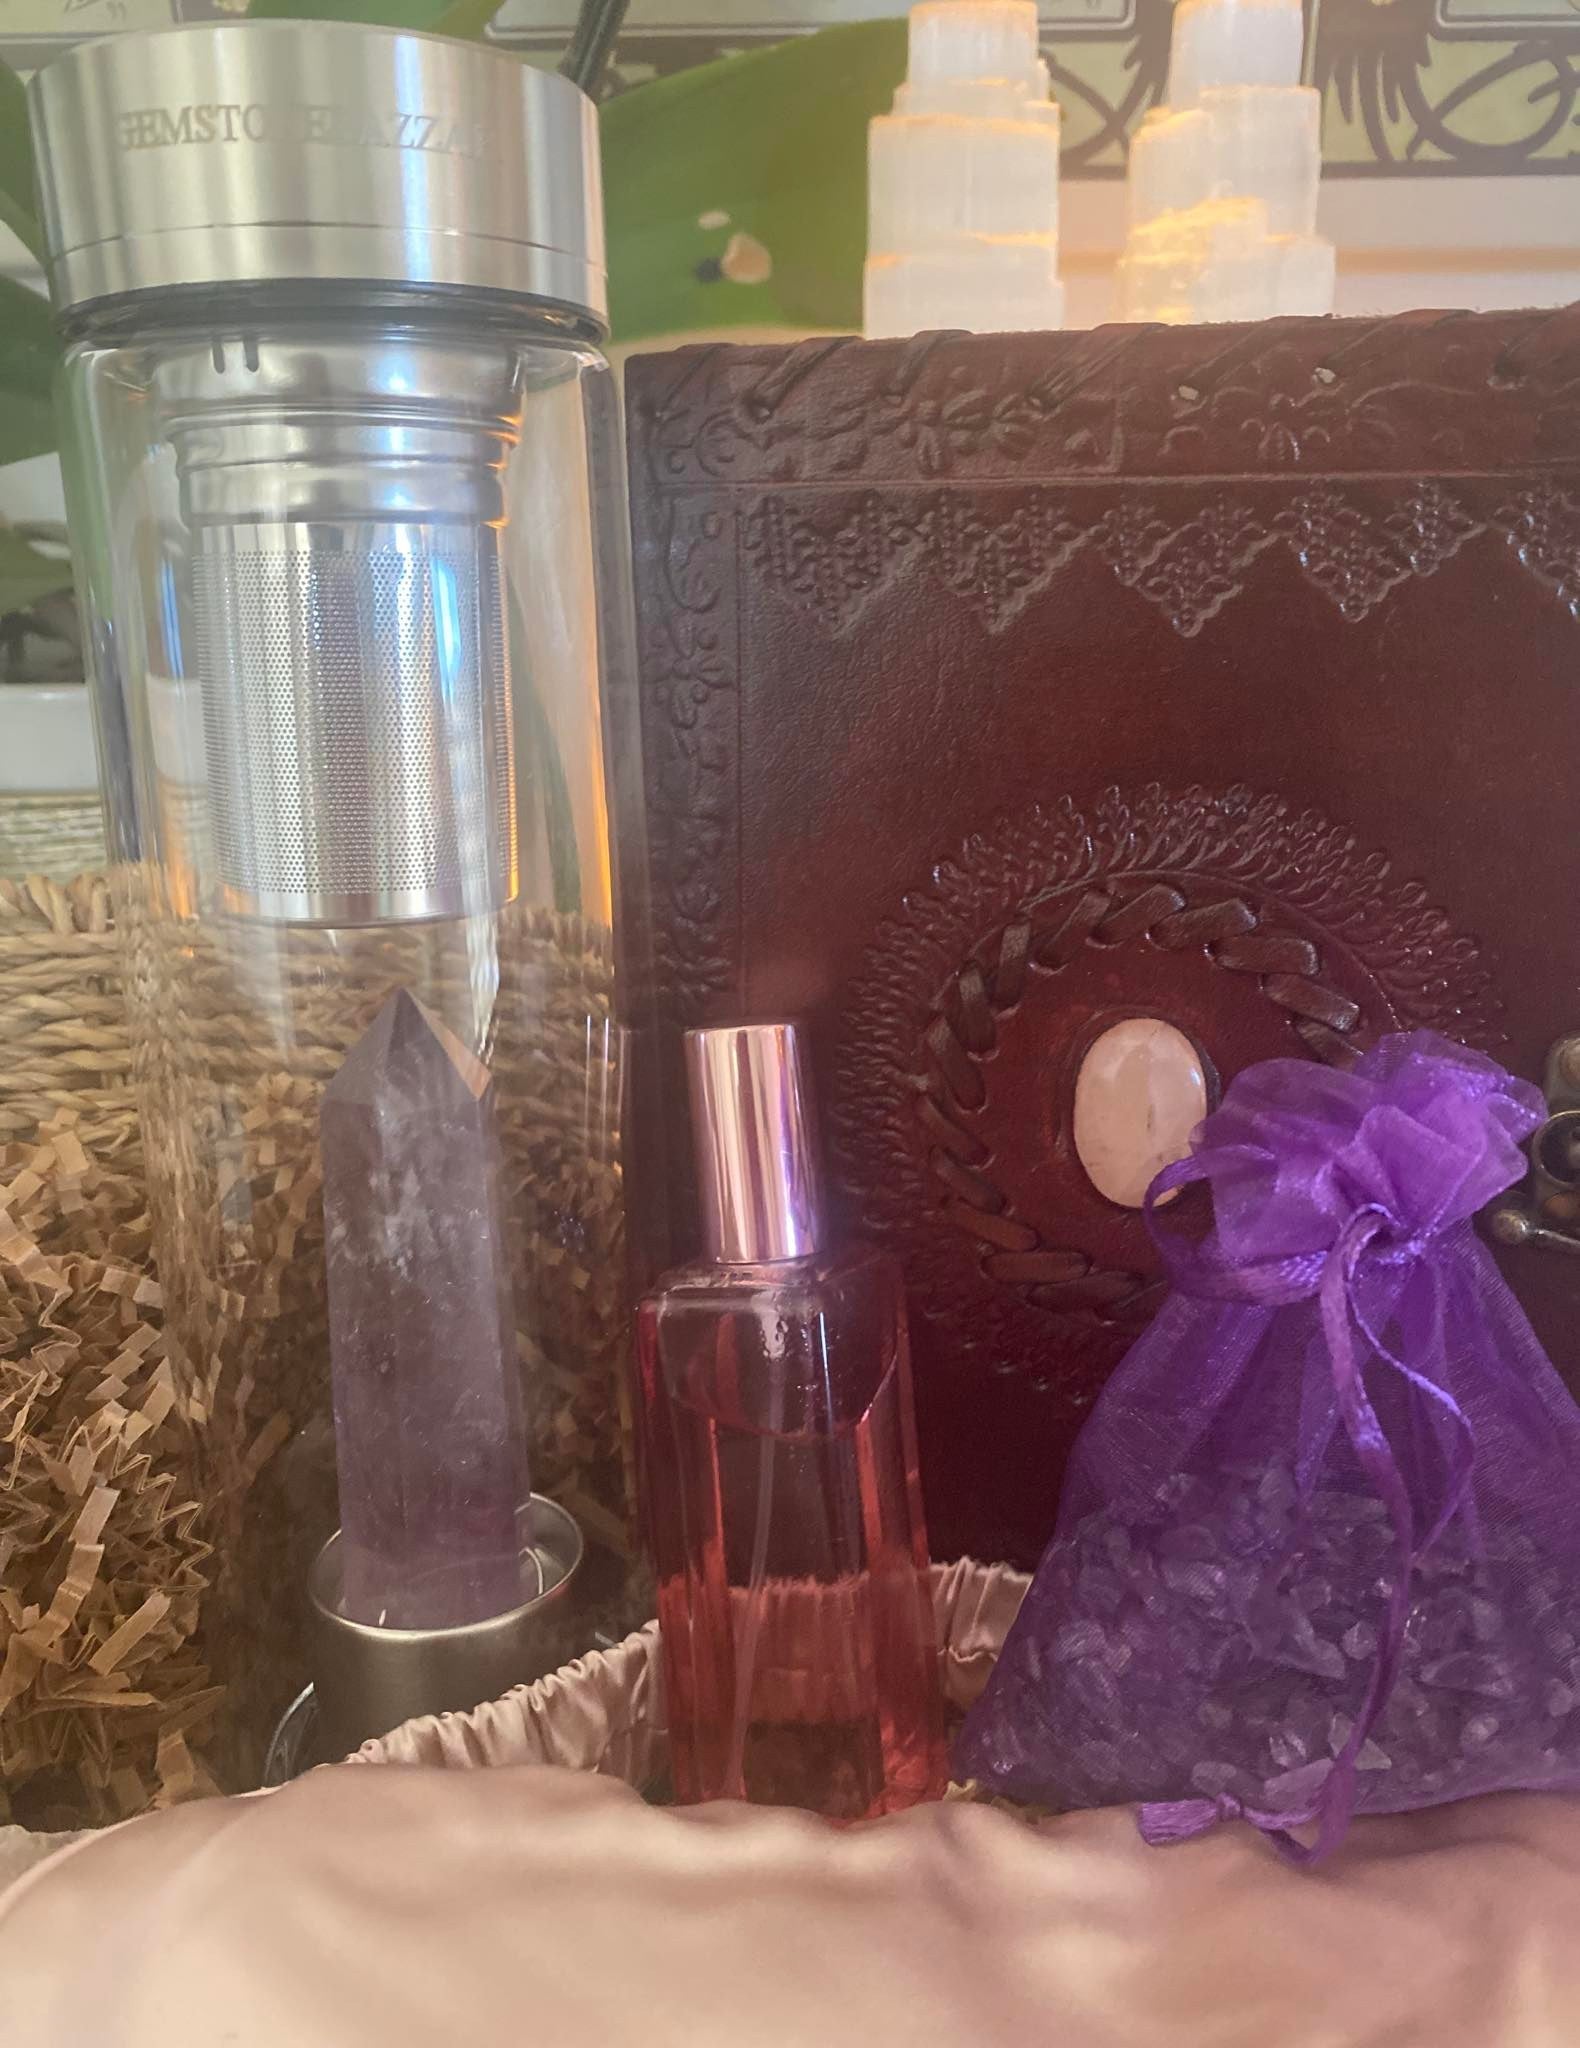 Daily Ritual Tool Kit for good habits and crystal energy healing